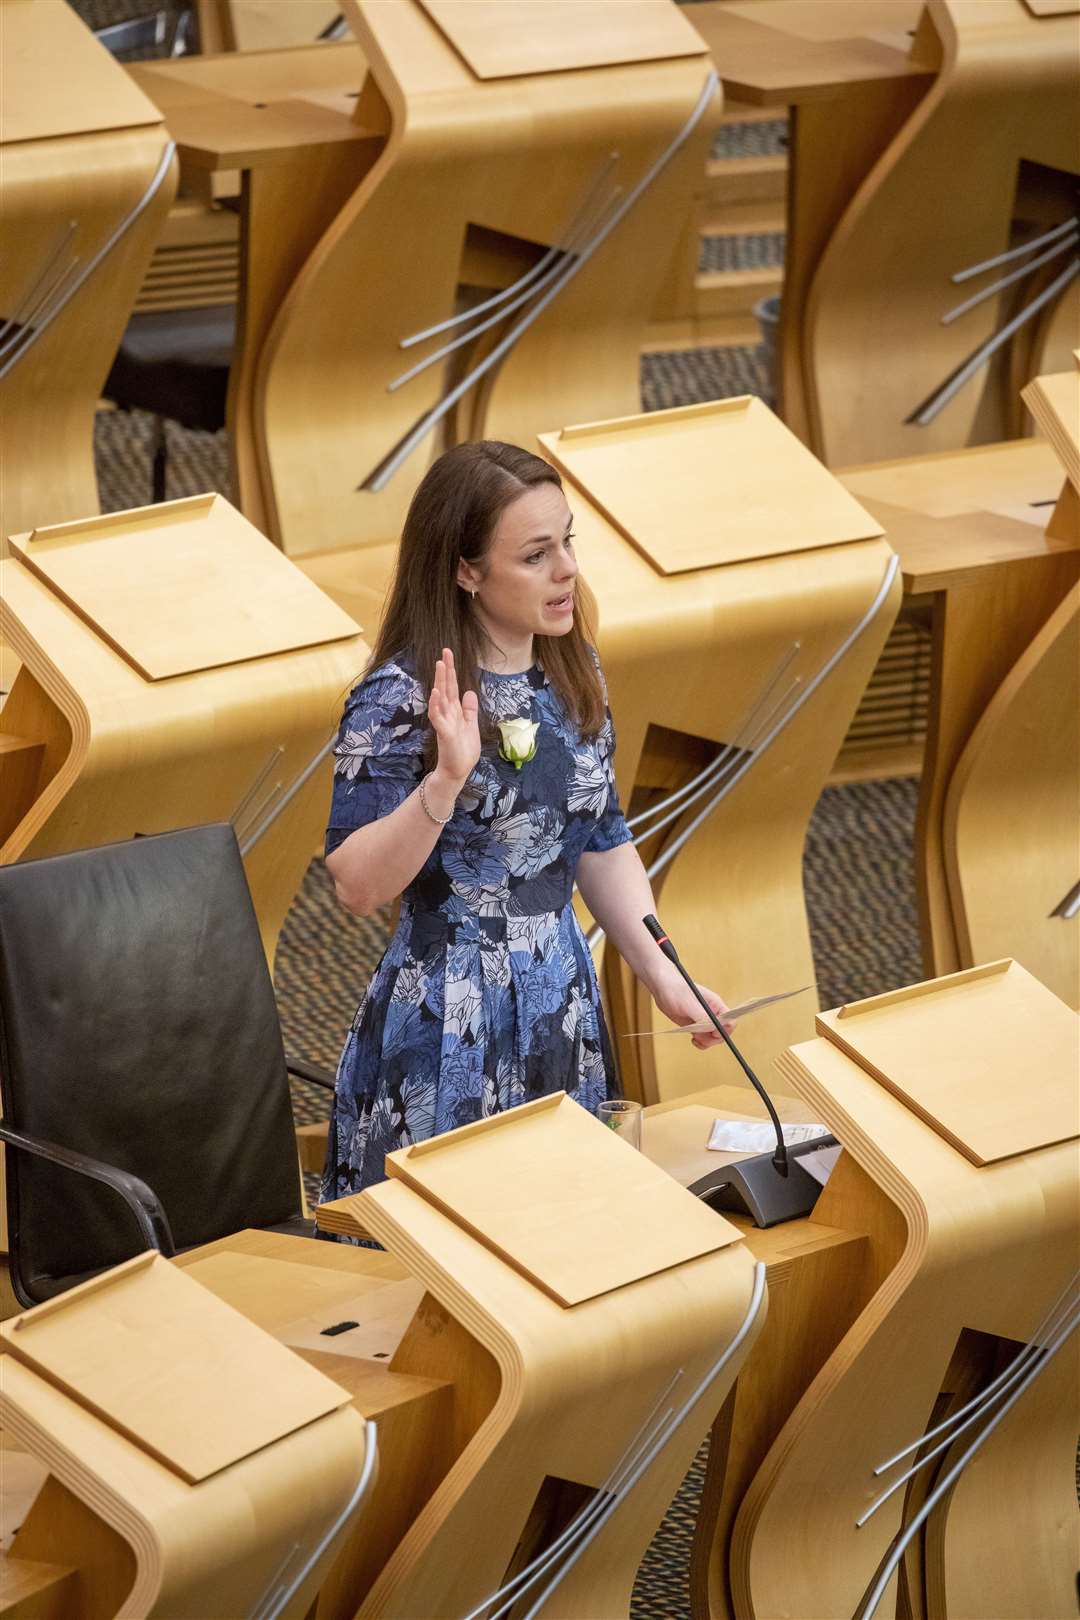 Kate Forbes is sworn in as member for Skye, Lochaber and Badenoch. Picture: Andrew Cowan, Scottish Parliament media relations office.